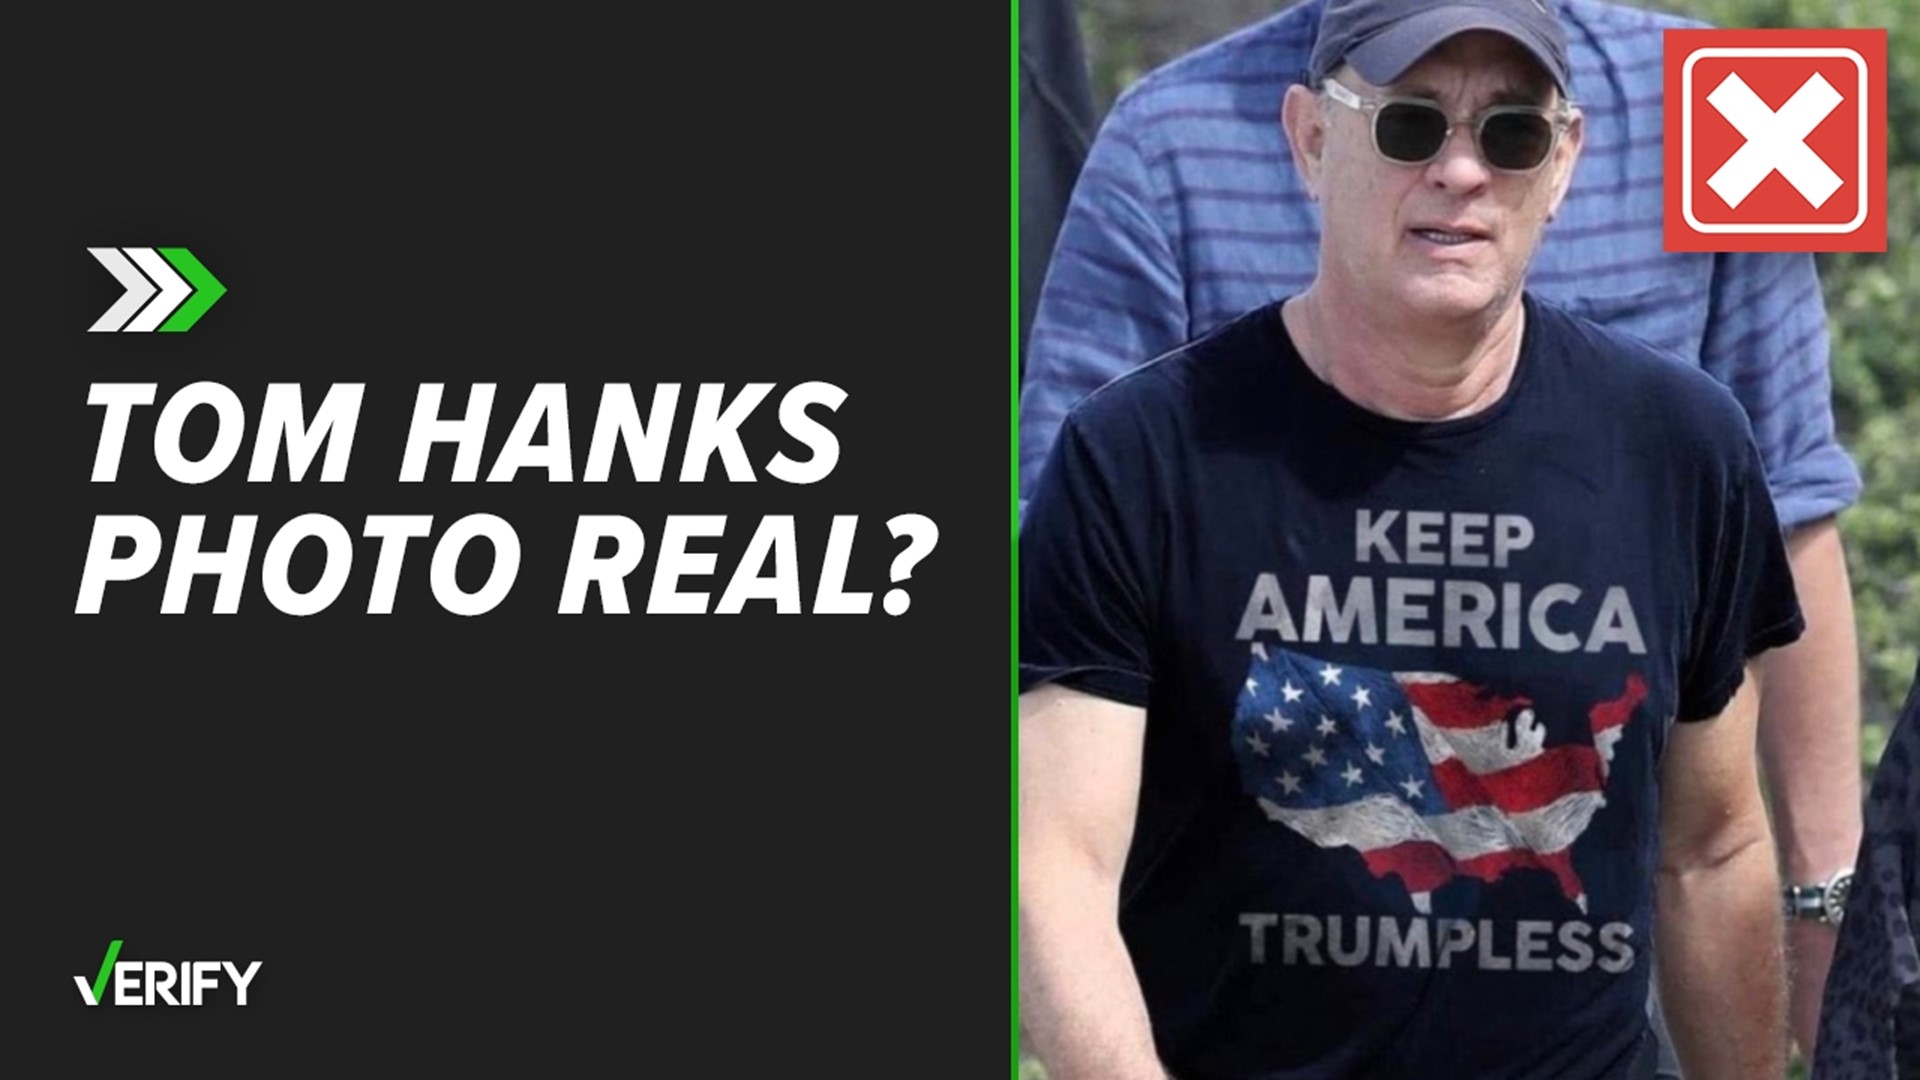 Actor Tom Hanks wasn’t wearing a ‘Keep America Trumpless’ shirt, as viral posts show. The original photo was taken from Sydney, Australia in 2020.